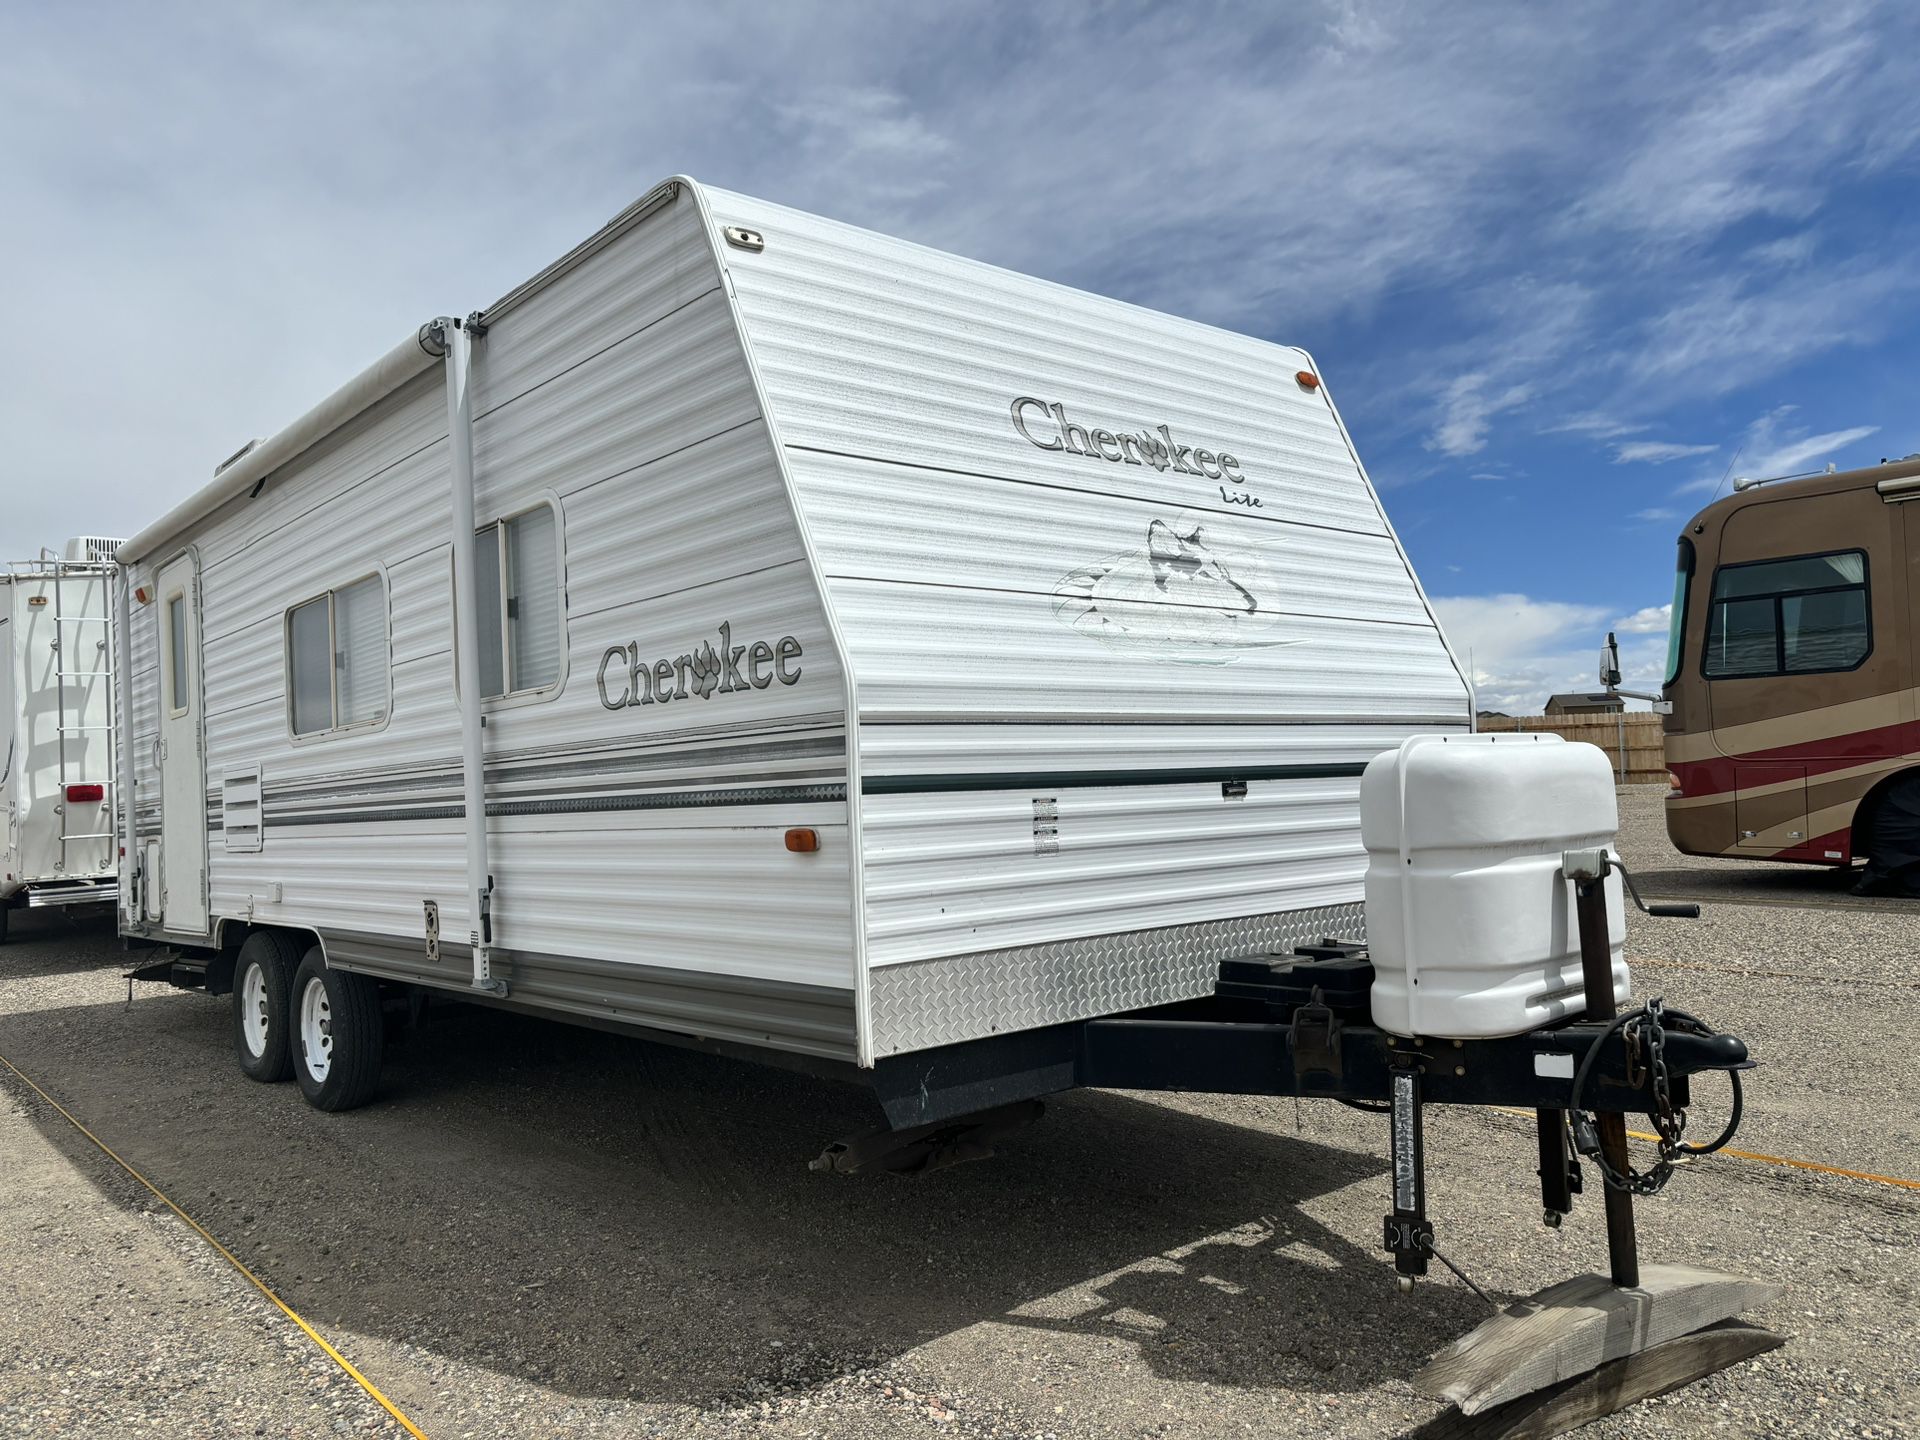 2002 Forest river Cherokee 26Y one slide out  great condition in in out sleeps 6 weight of the trailer 4780 tires are like new roof air awaing everyth